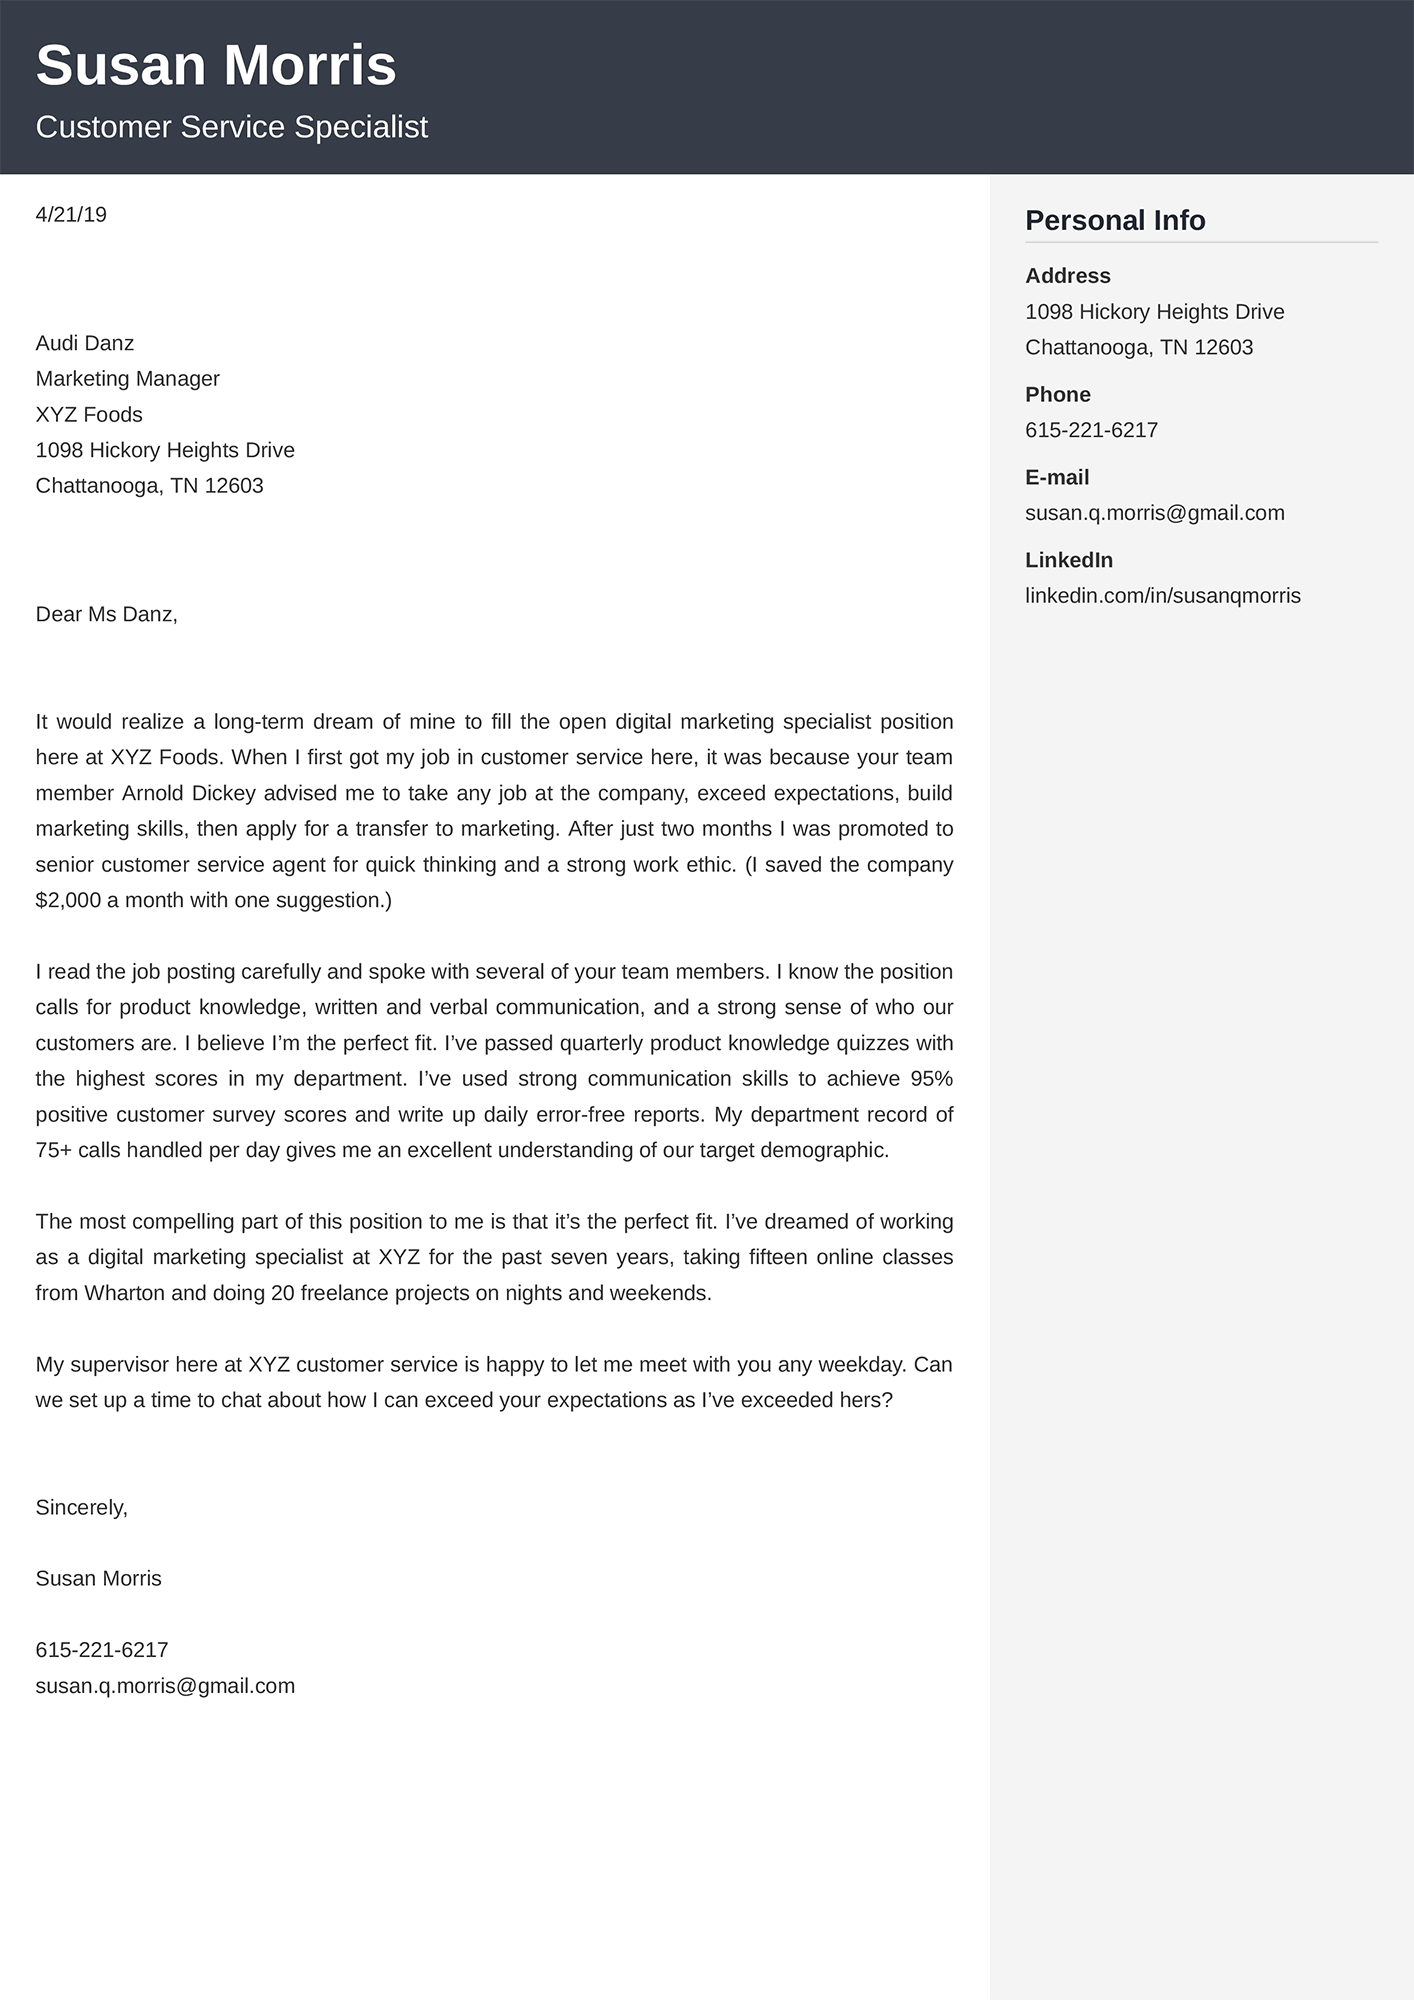 Marketing Job Covering Letter from cdn-images.zety.com